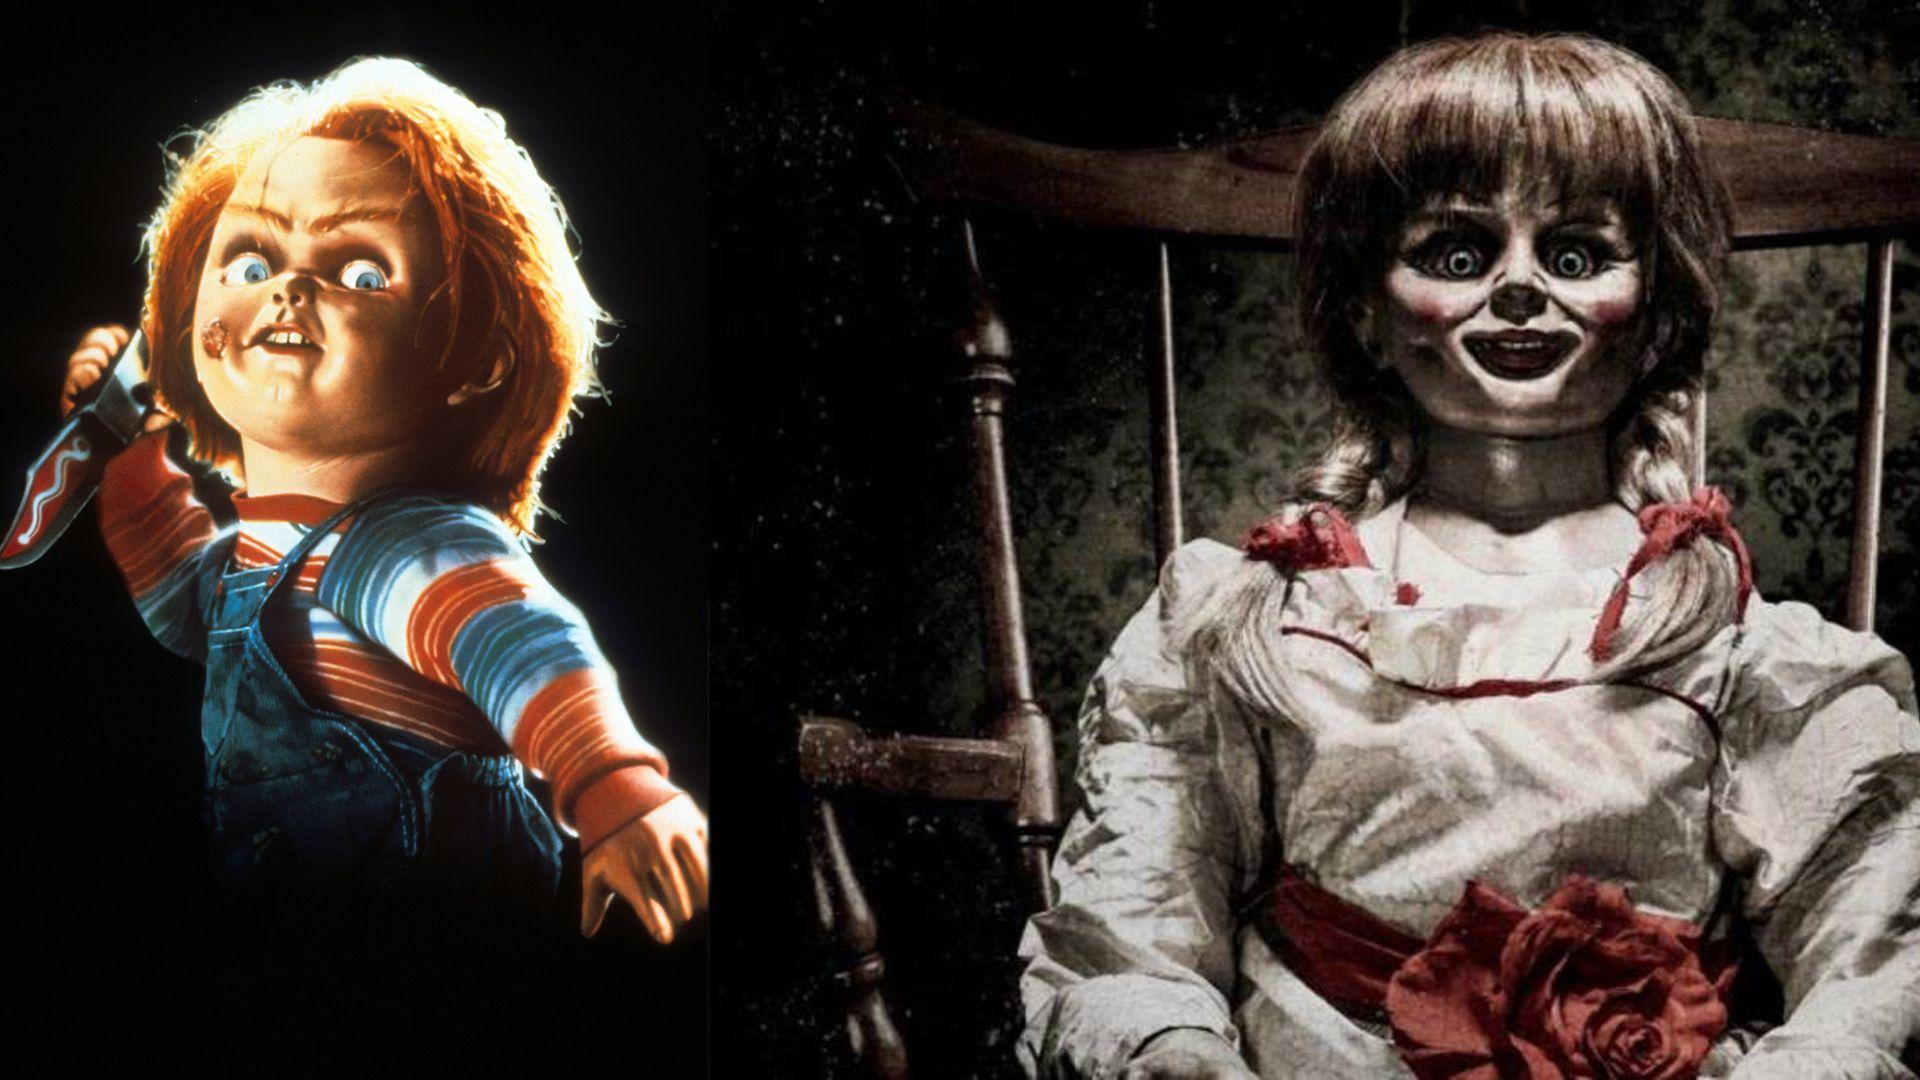 Annabelle vs. Chucky: Which creepy doll should you fear the most